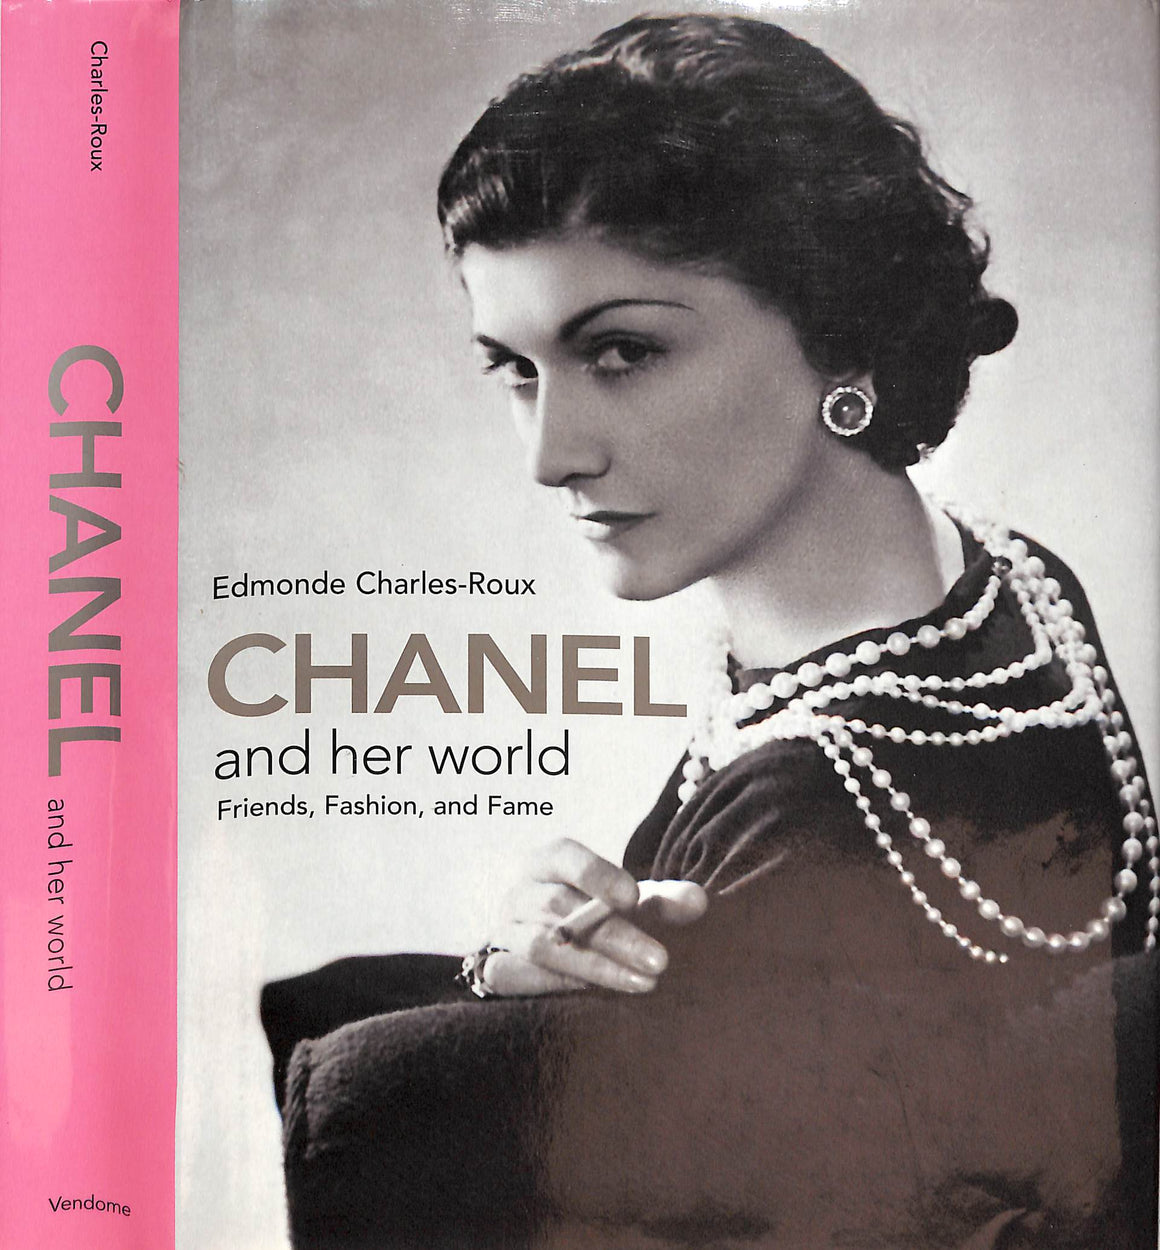 "Chanel And Her World: Friends, Fashion, And Fame" 2005 CHARLES-ROUX, Edmonde